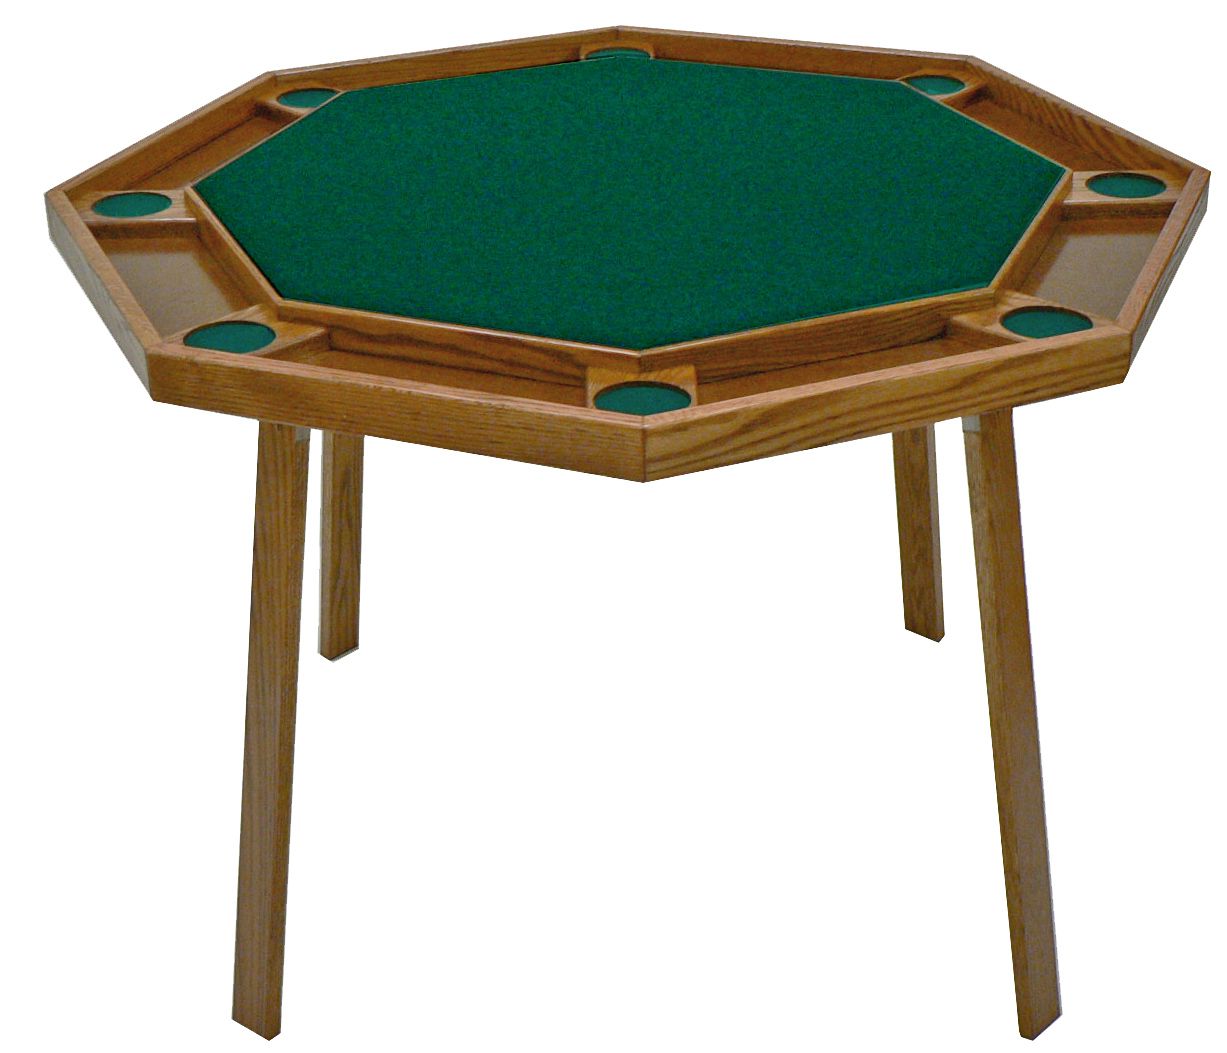 8-Player 48" Folding Poker Wood Poker Game Table #9W By Kestell